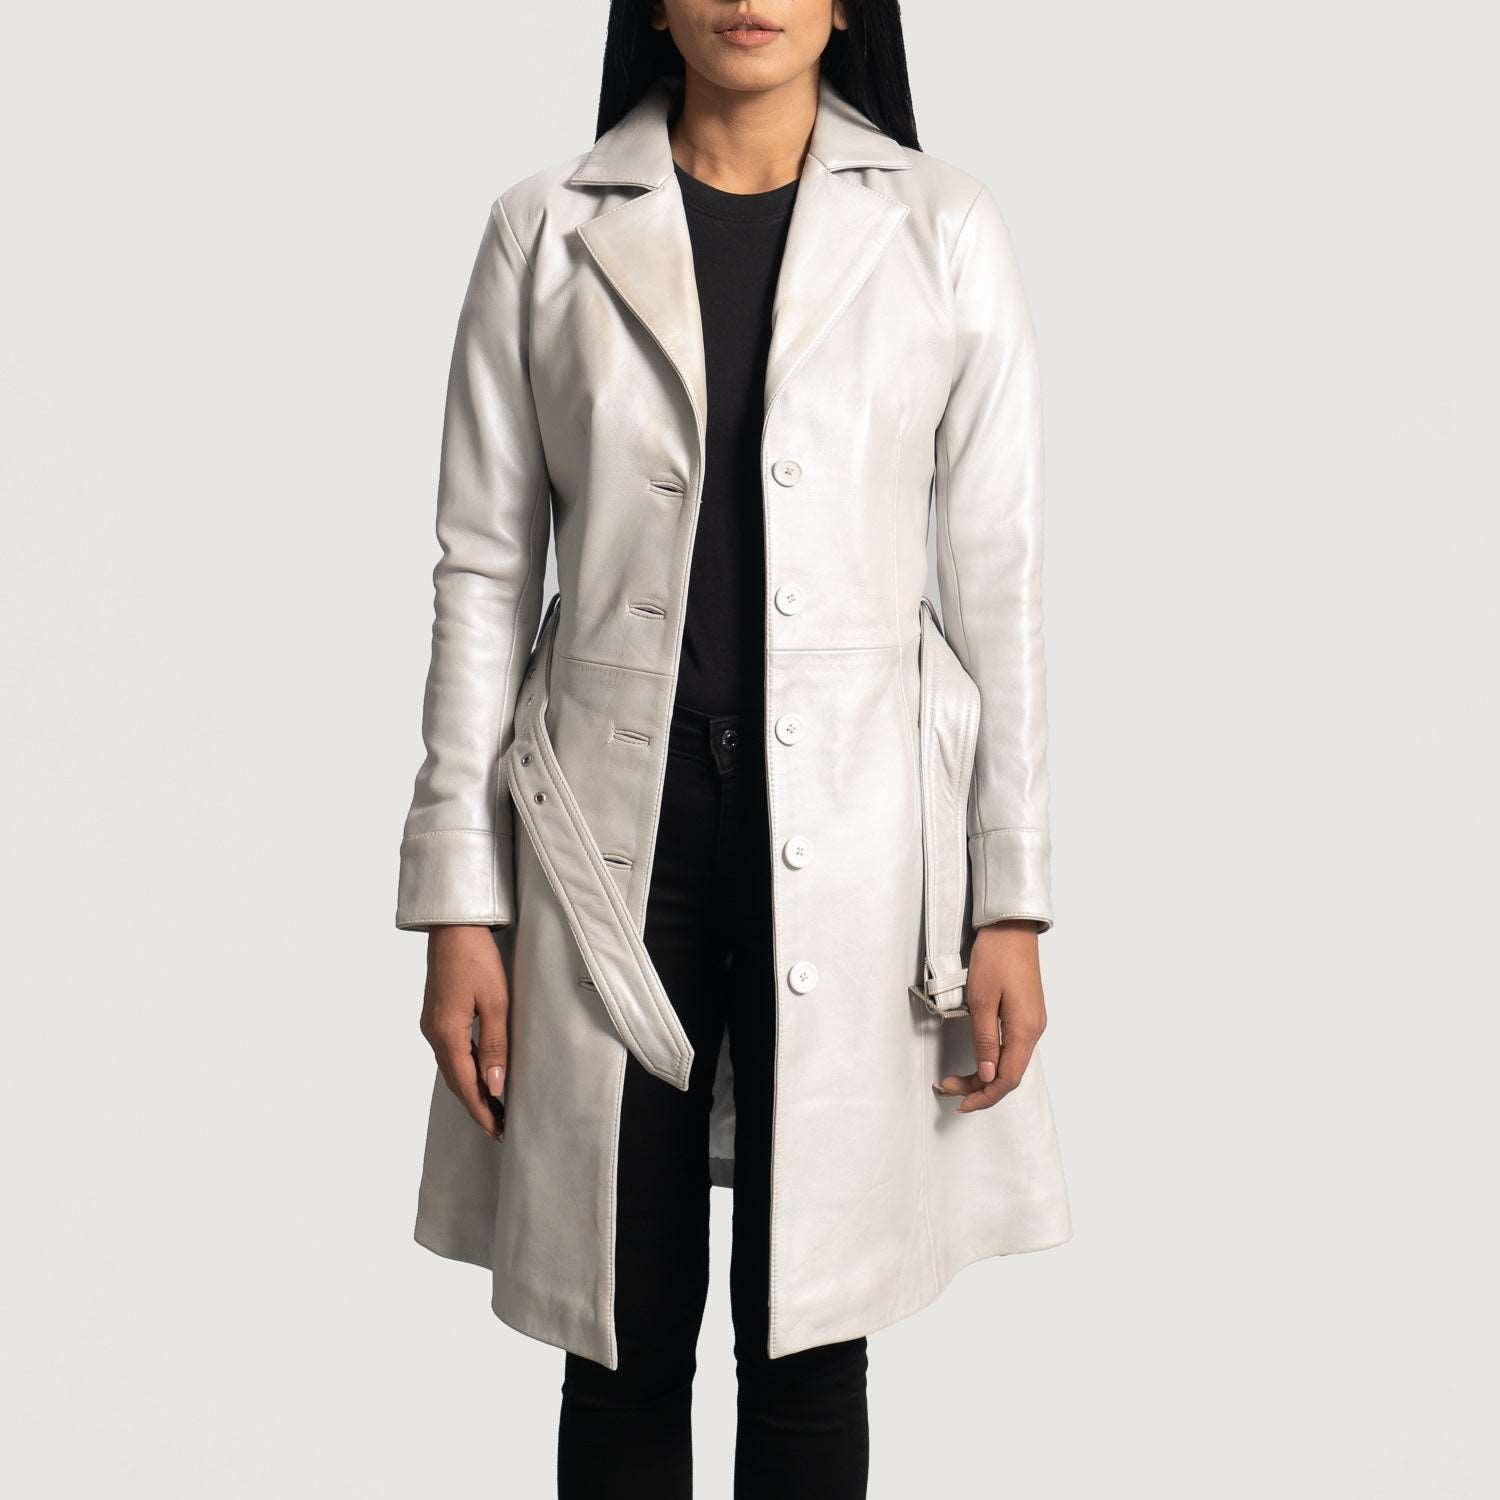 Womens Silver White Leather Trench Coat Full Length - Leather CoatWomen's Silver White Leather Trench Coat Full Length, Full Length Silver White Leather Coat for Women, Women's Leather Trench Coat, Stylish Women's Leather Trench Coat, Premium Quality Women's Leather Coat, Elegant Women's Leather Outerwear,